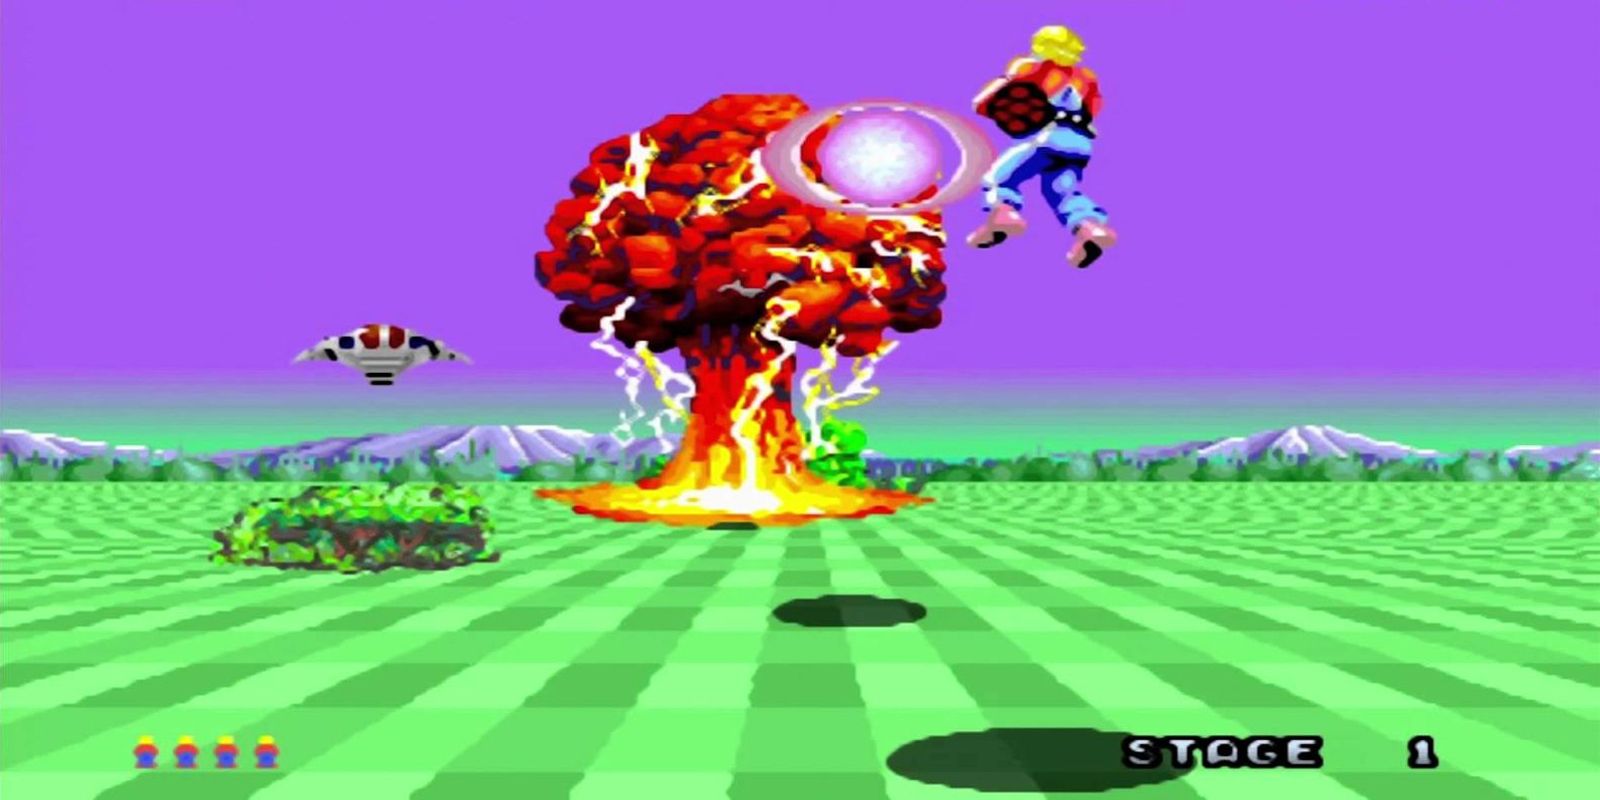 Space harrier flying across the screen and shooting down enemies